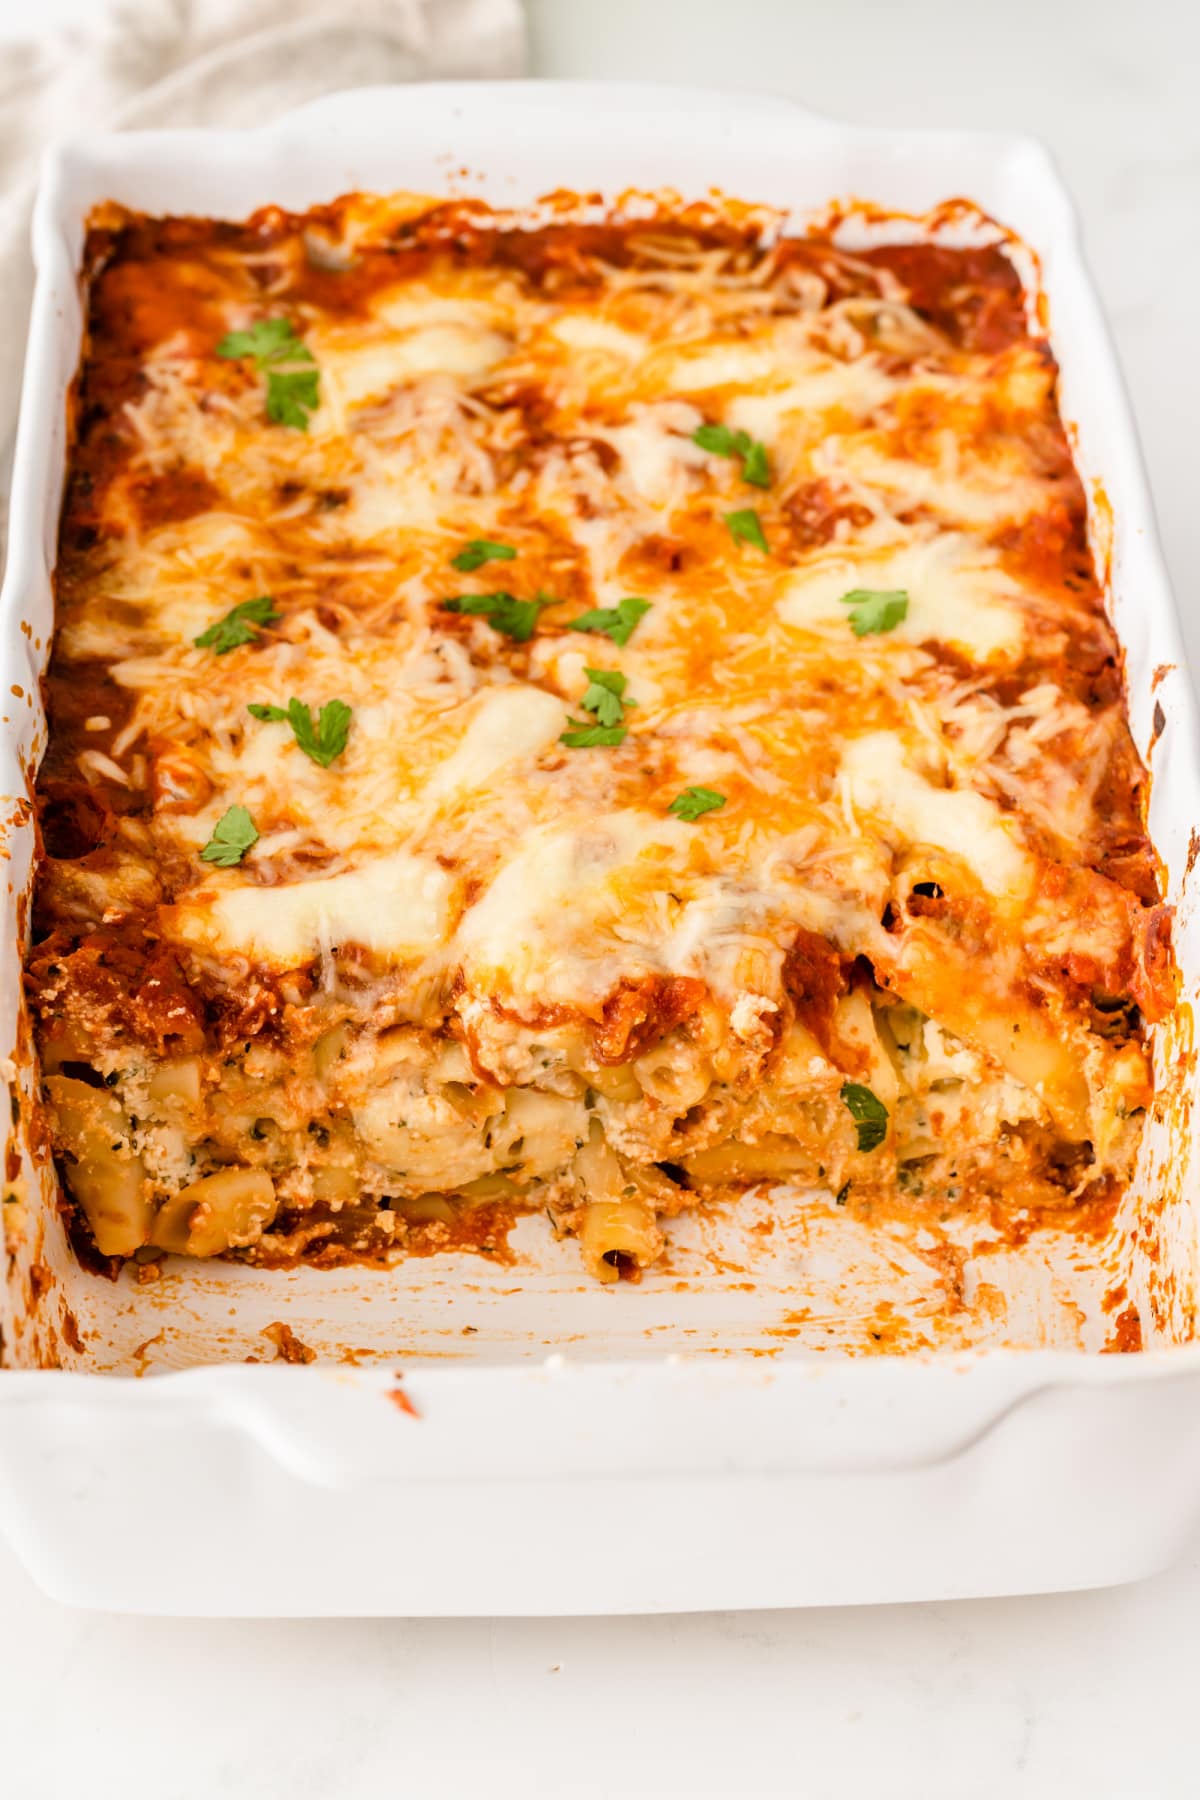 Baked ziti with several slices removed